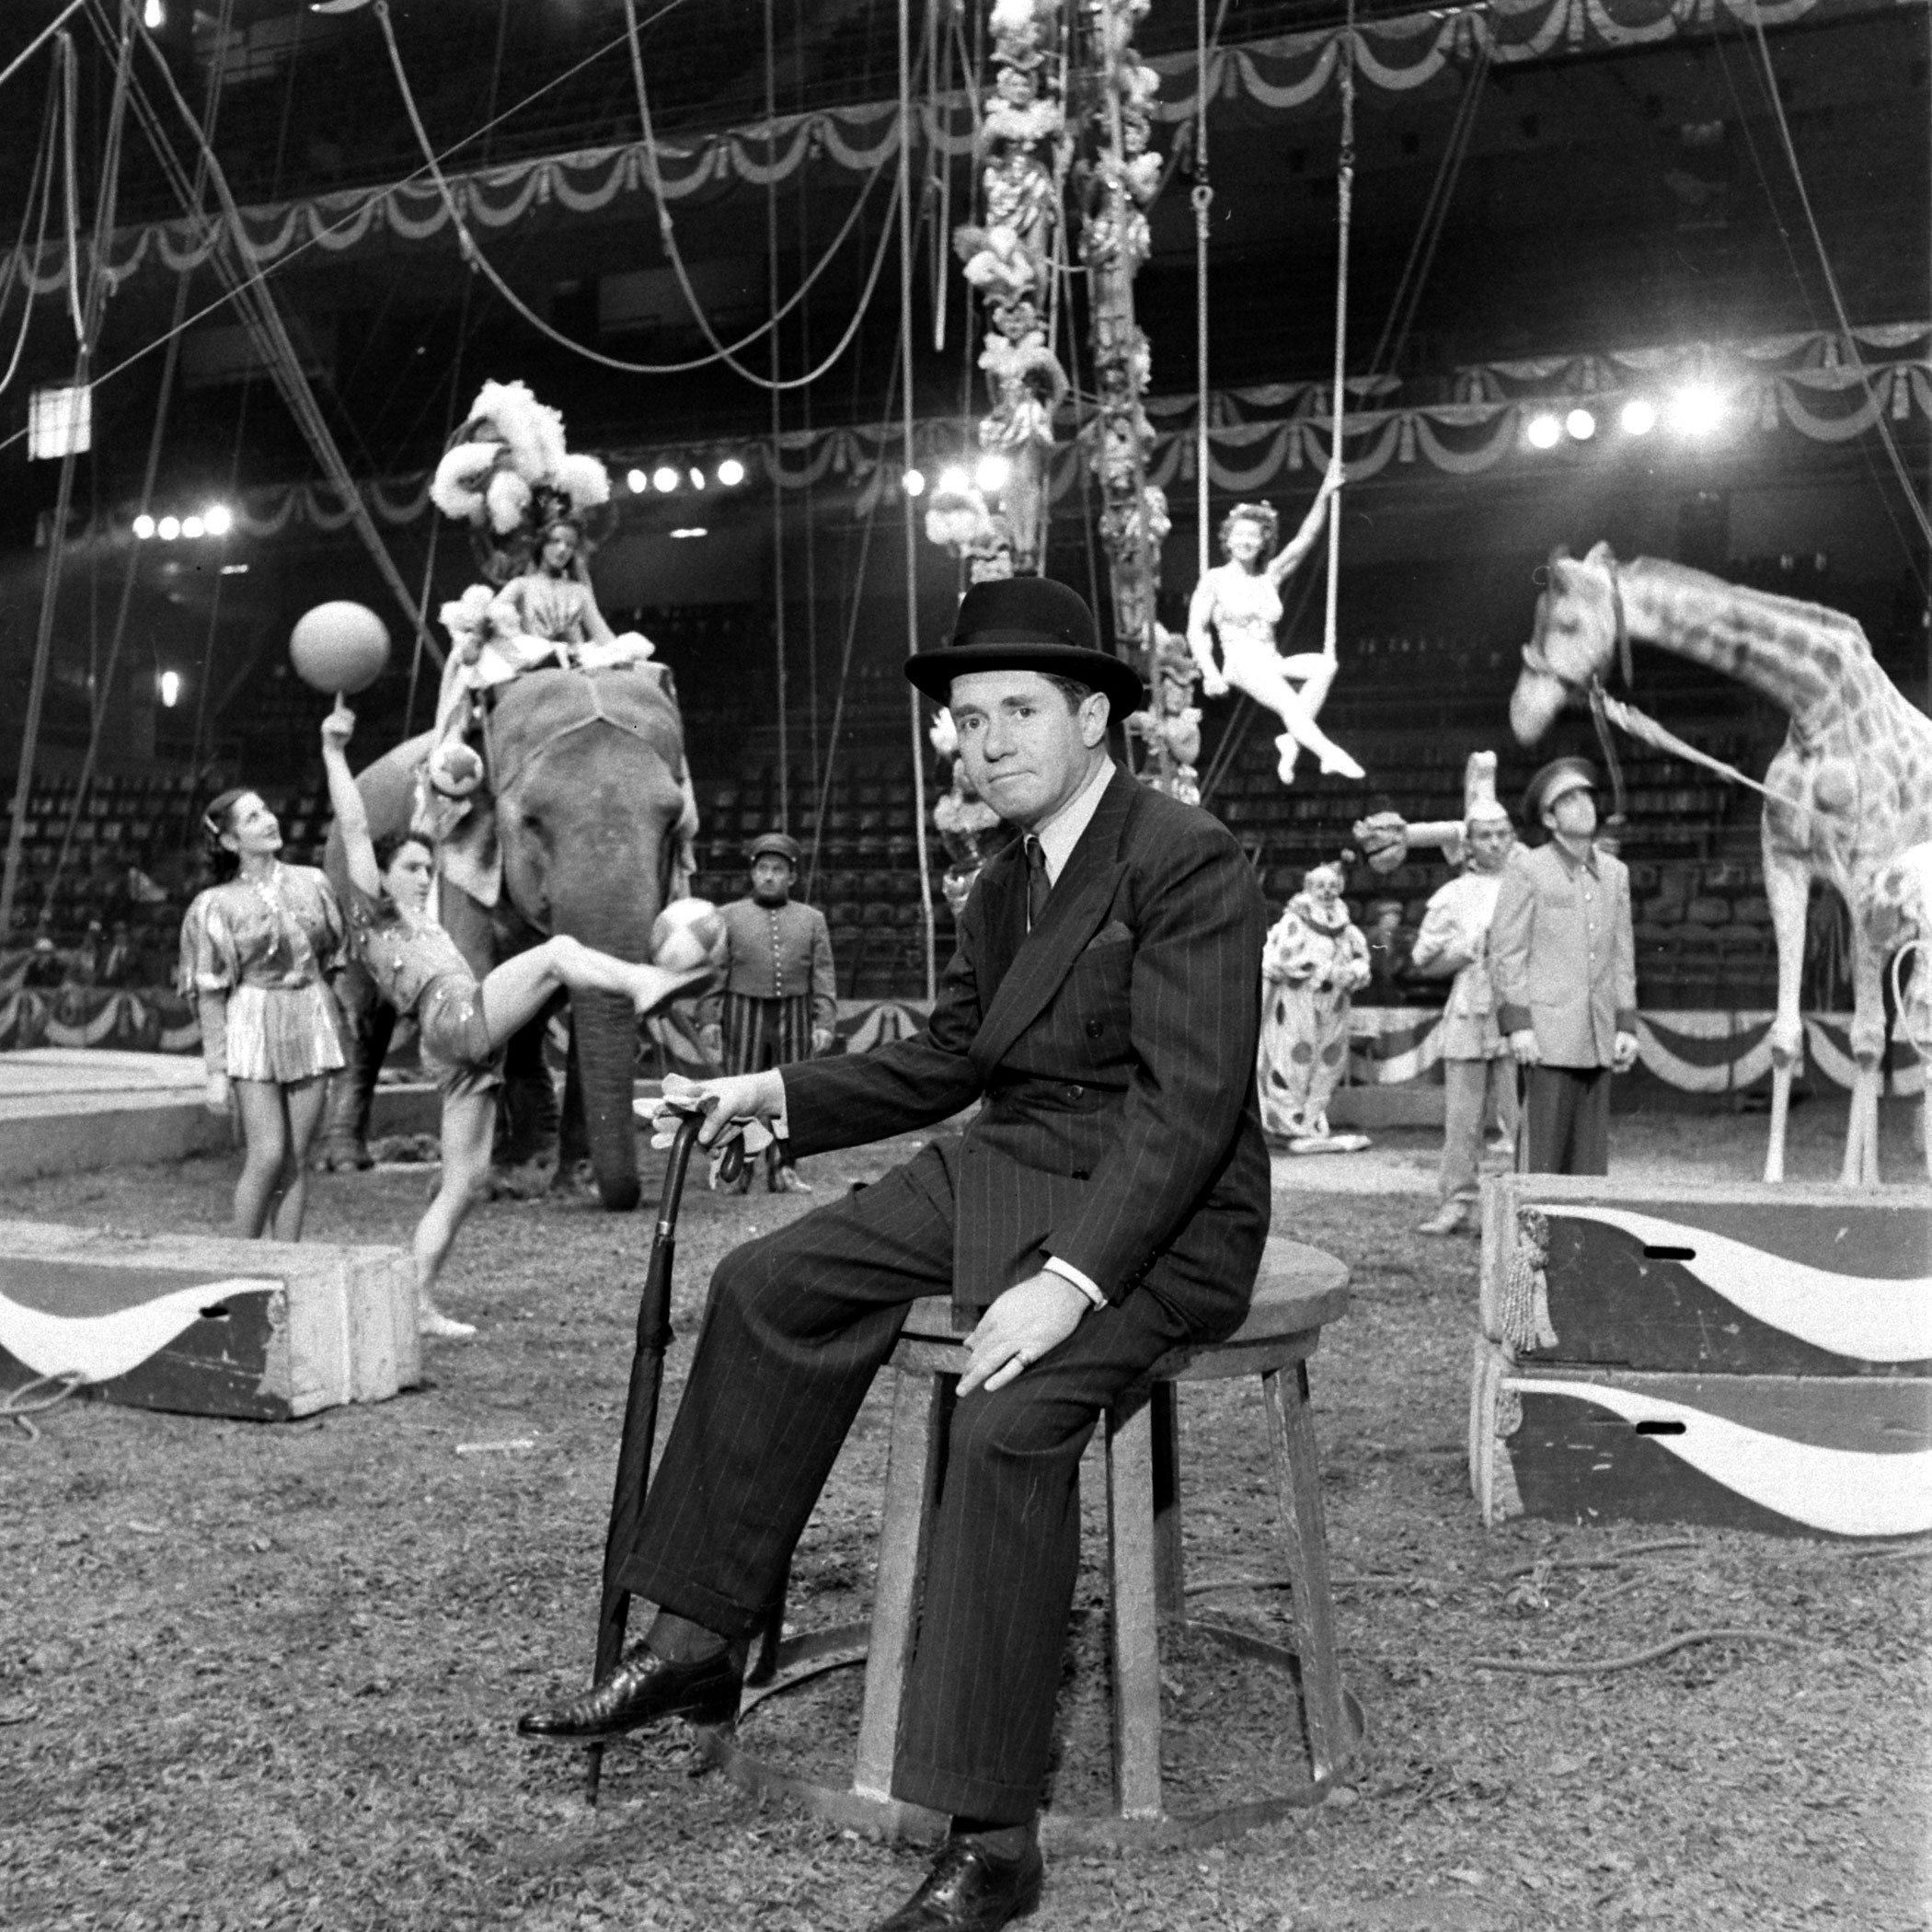 Circus president John Ringling North with performers, 1949.